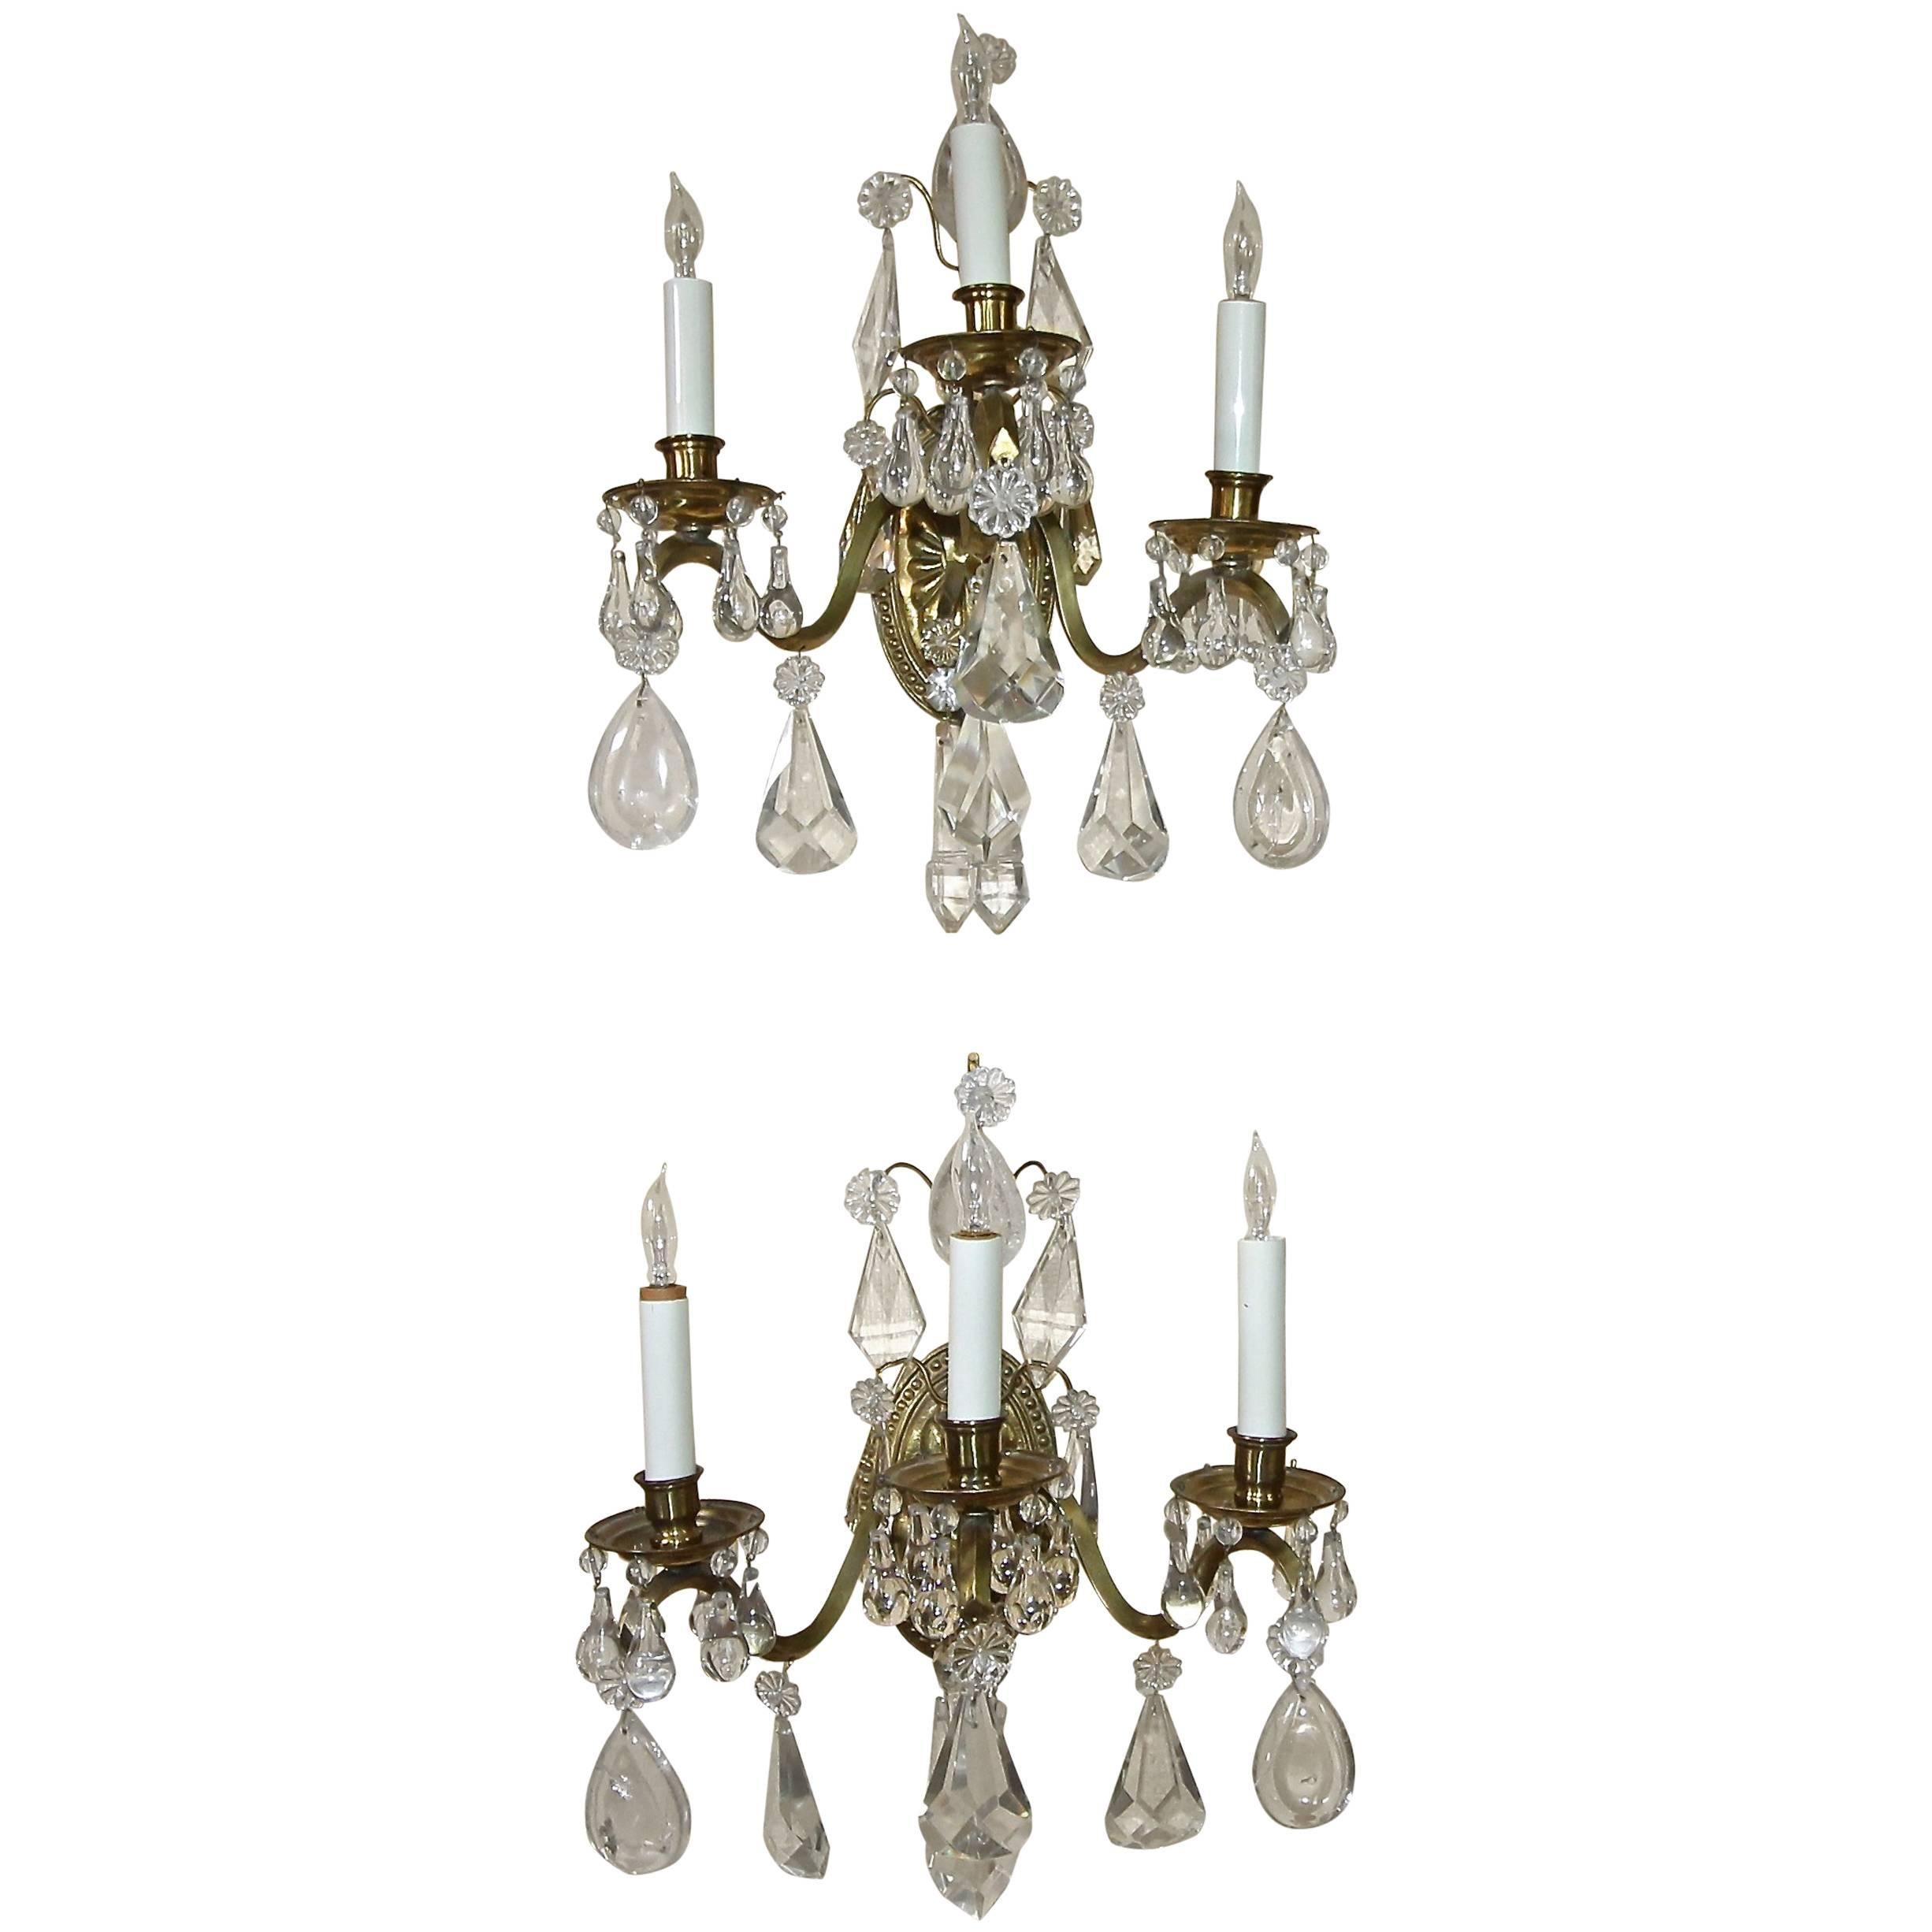 Pair of French Rock Crystal Brass Wall Sconces For Sale